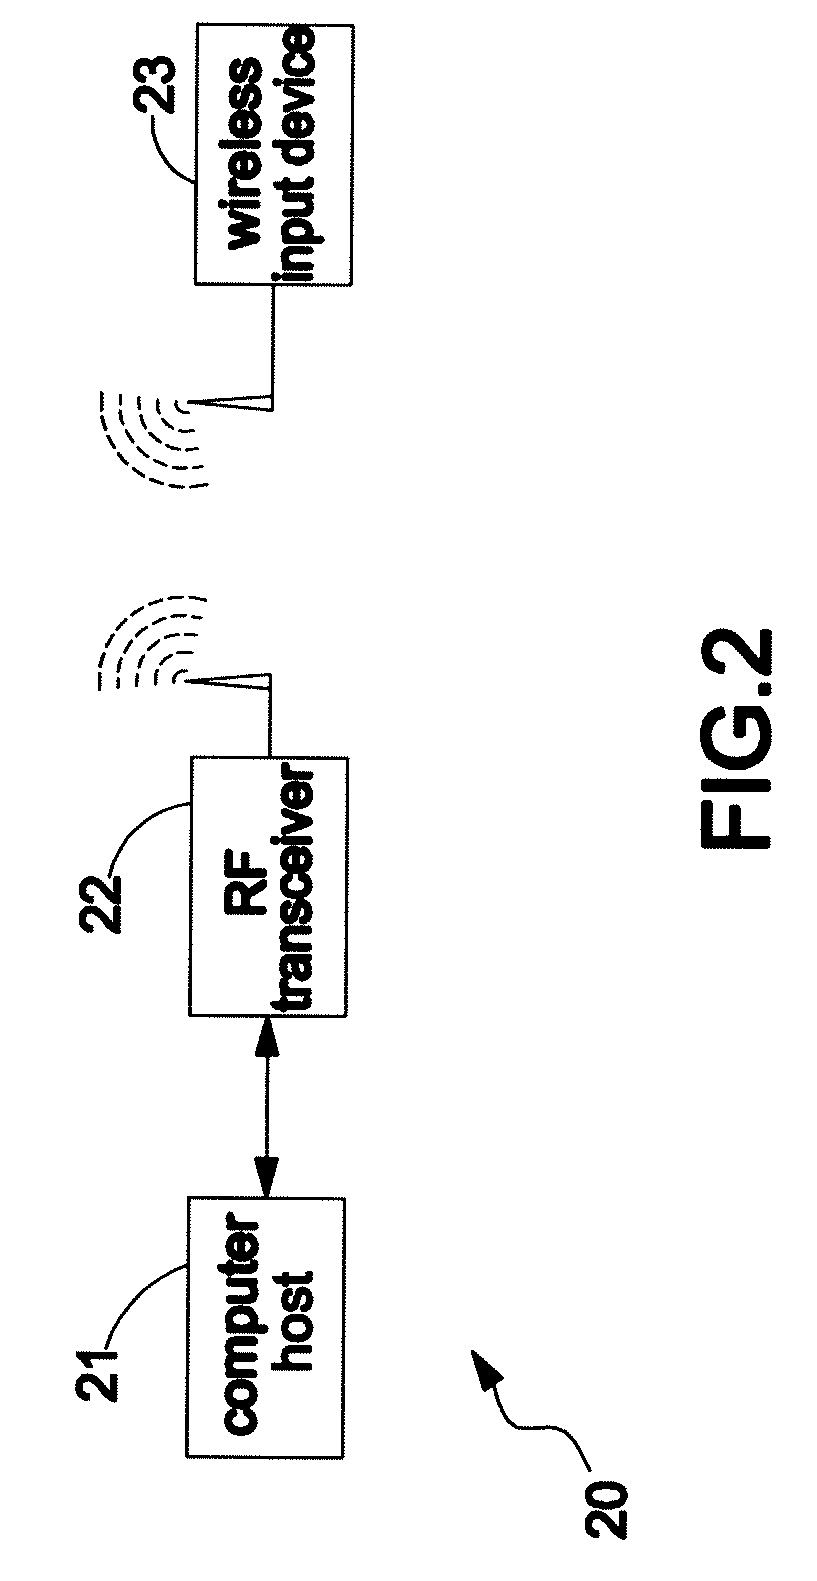 Power-Saving Wireless Input Device and System